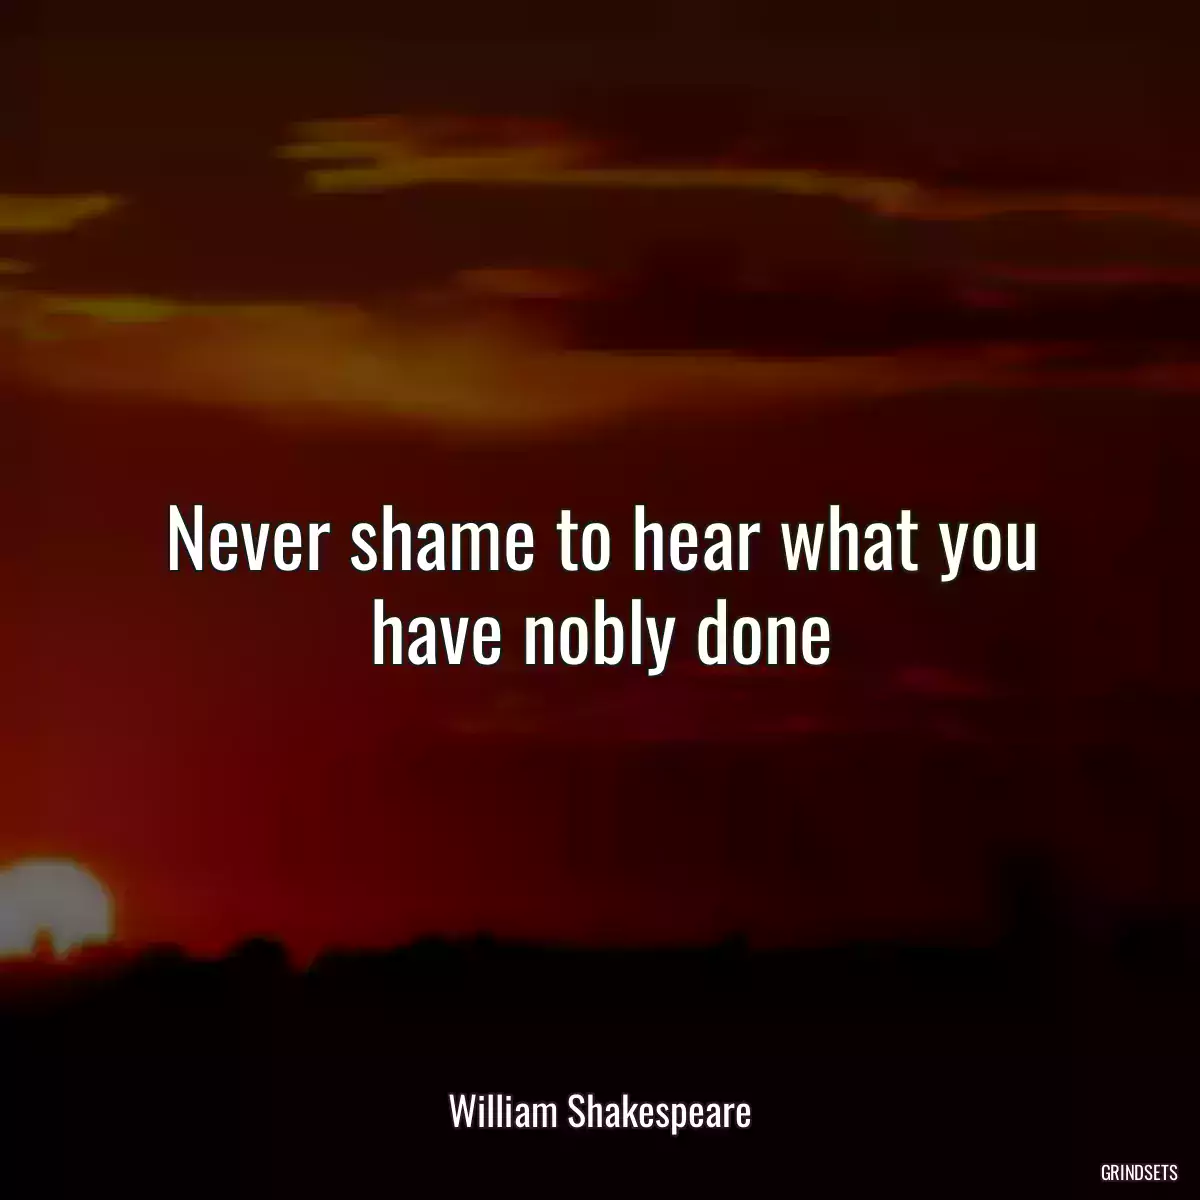 Never shame to hear what you have nobly done